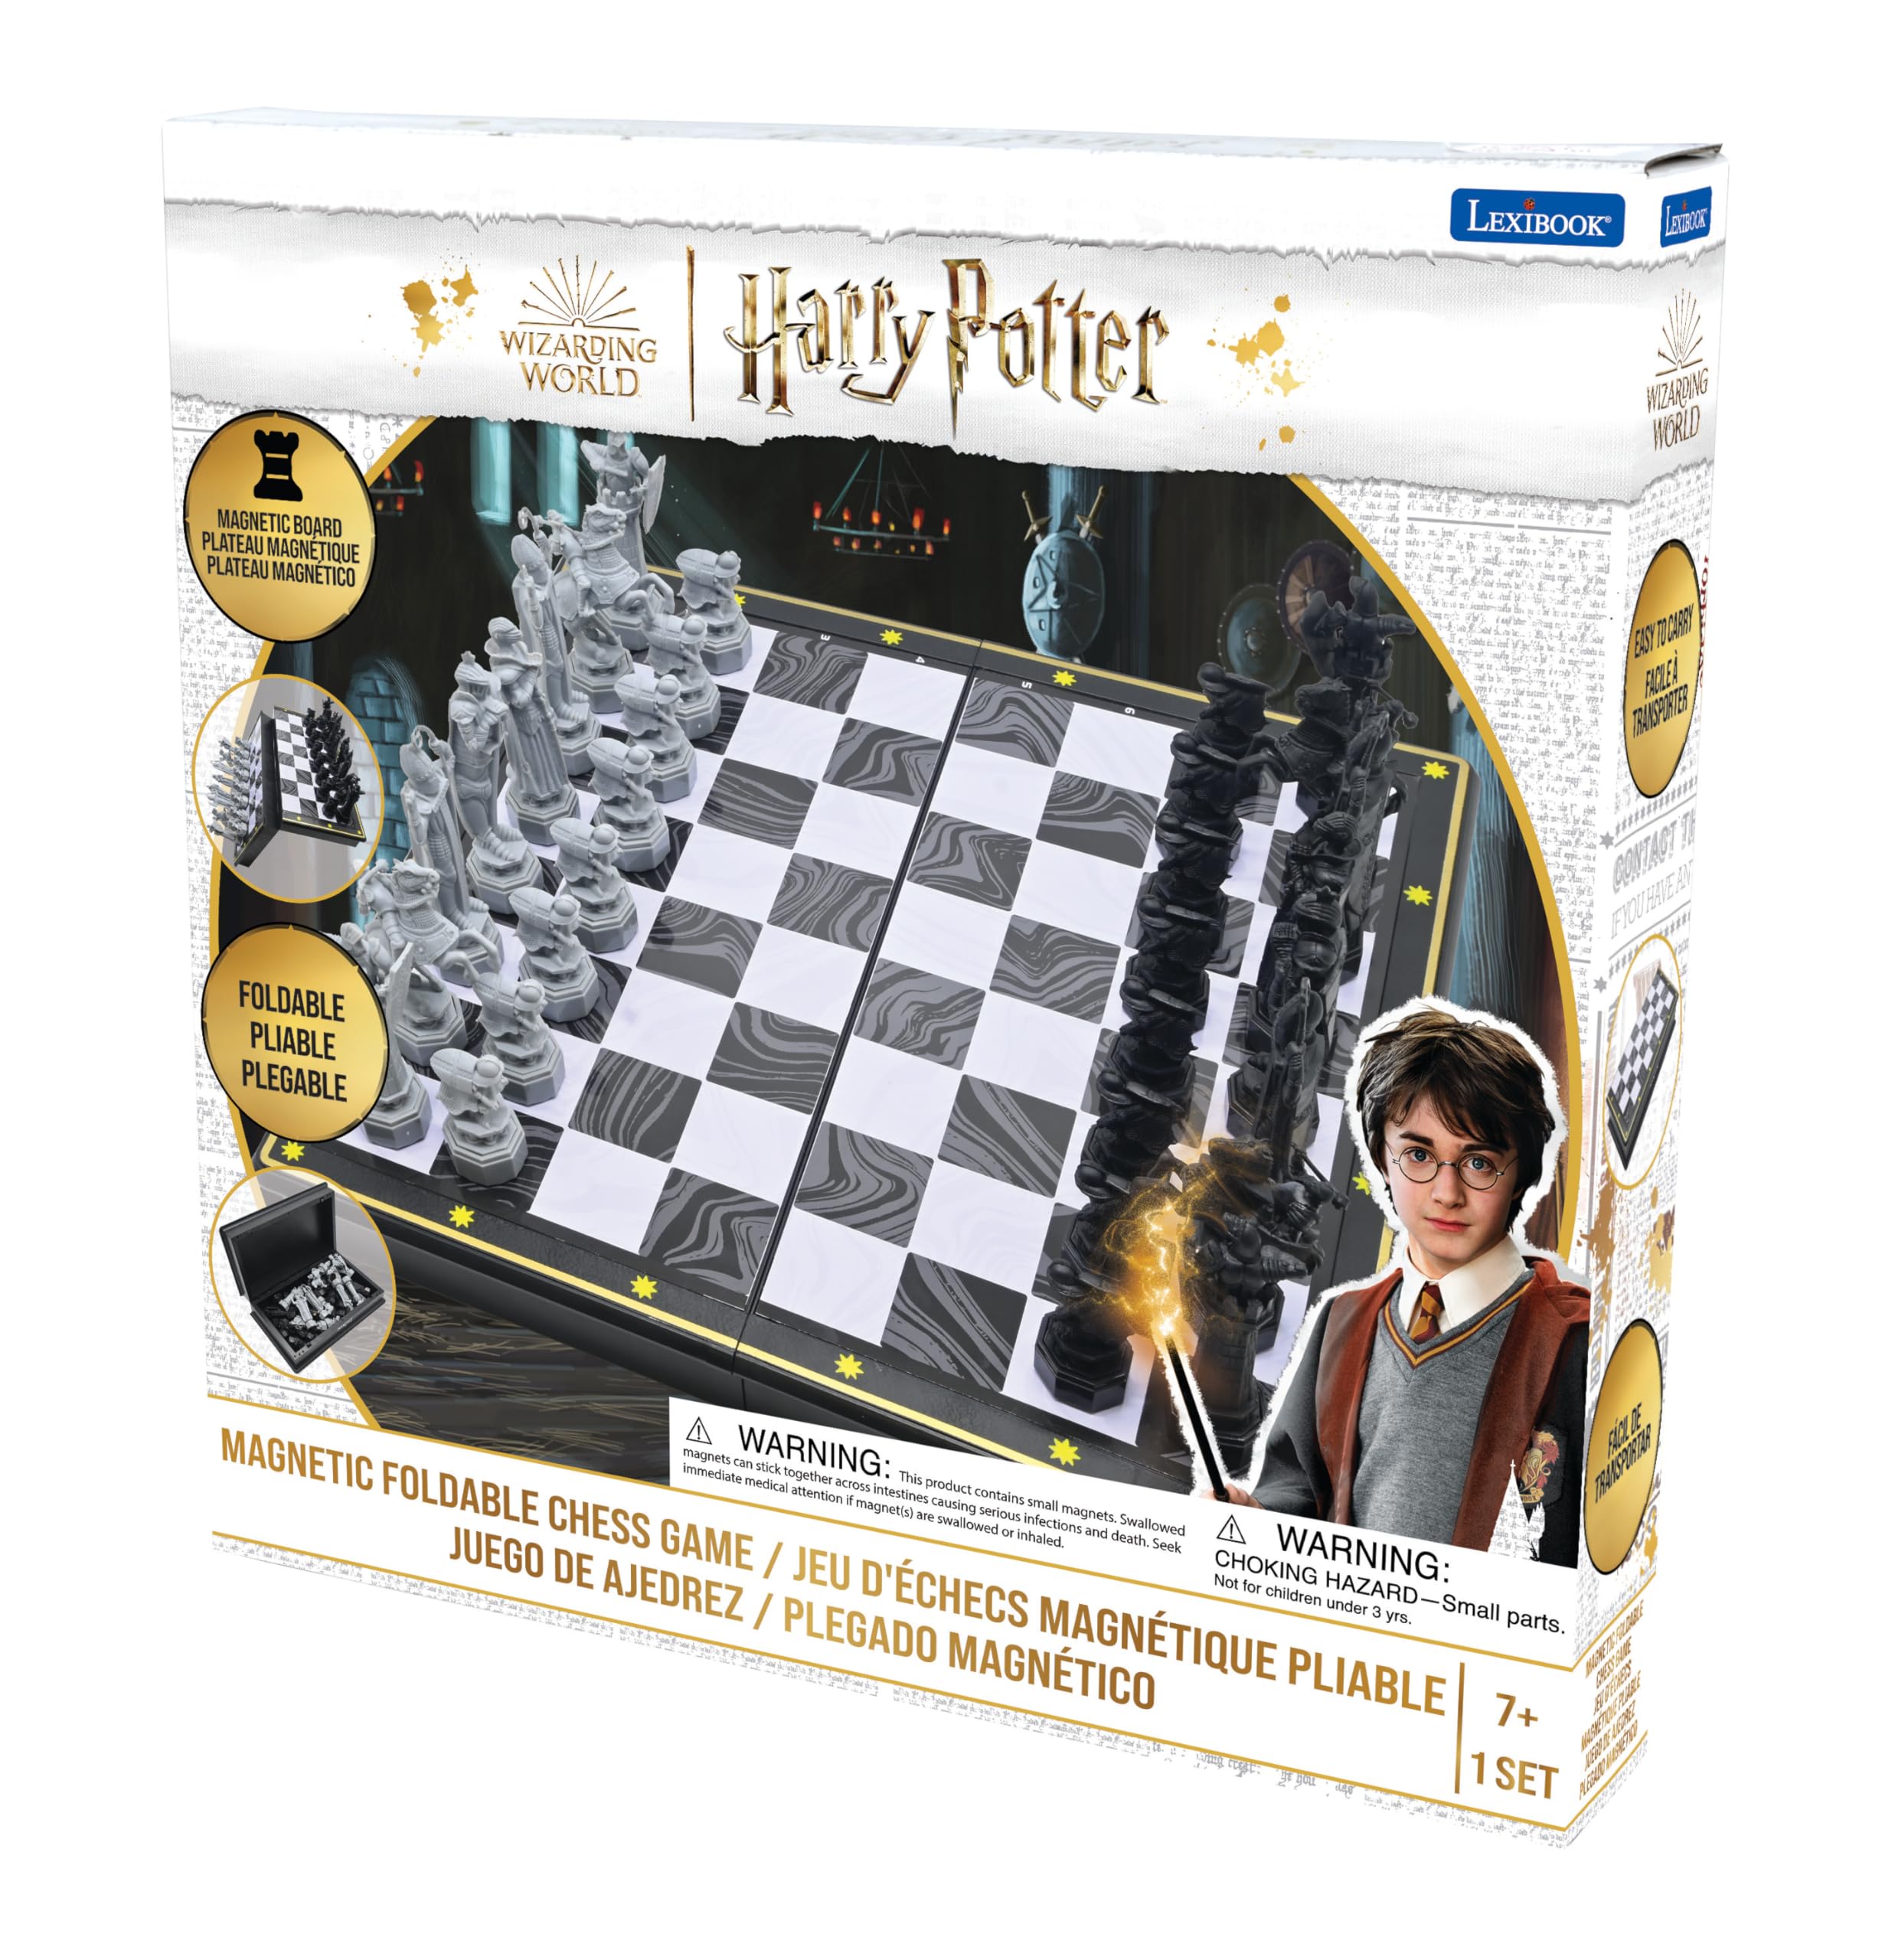 LEXiBOOK - Harry Potter Chess Games, Magnetic and Foldable Chess Board, 32 Pieces, Family Game, CGM300HP